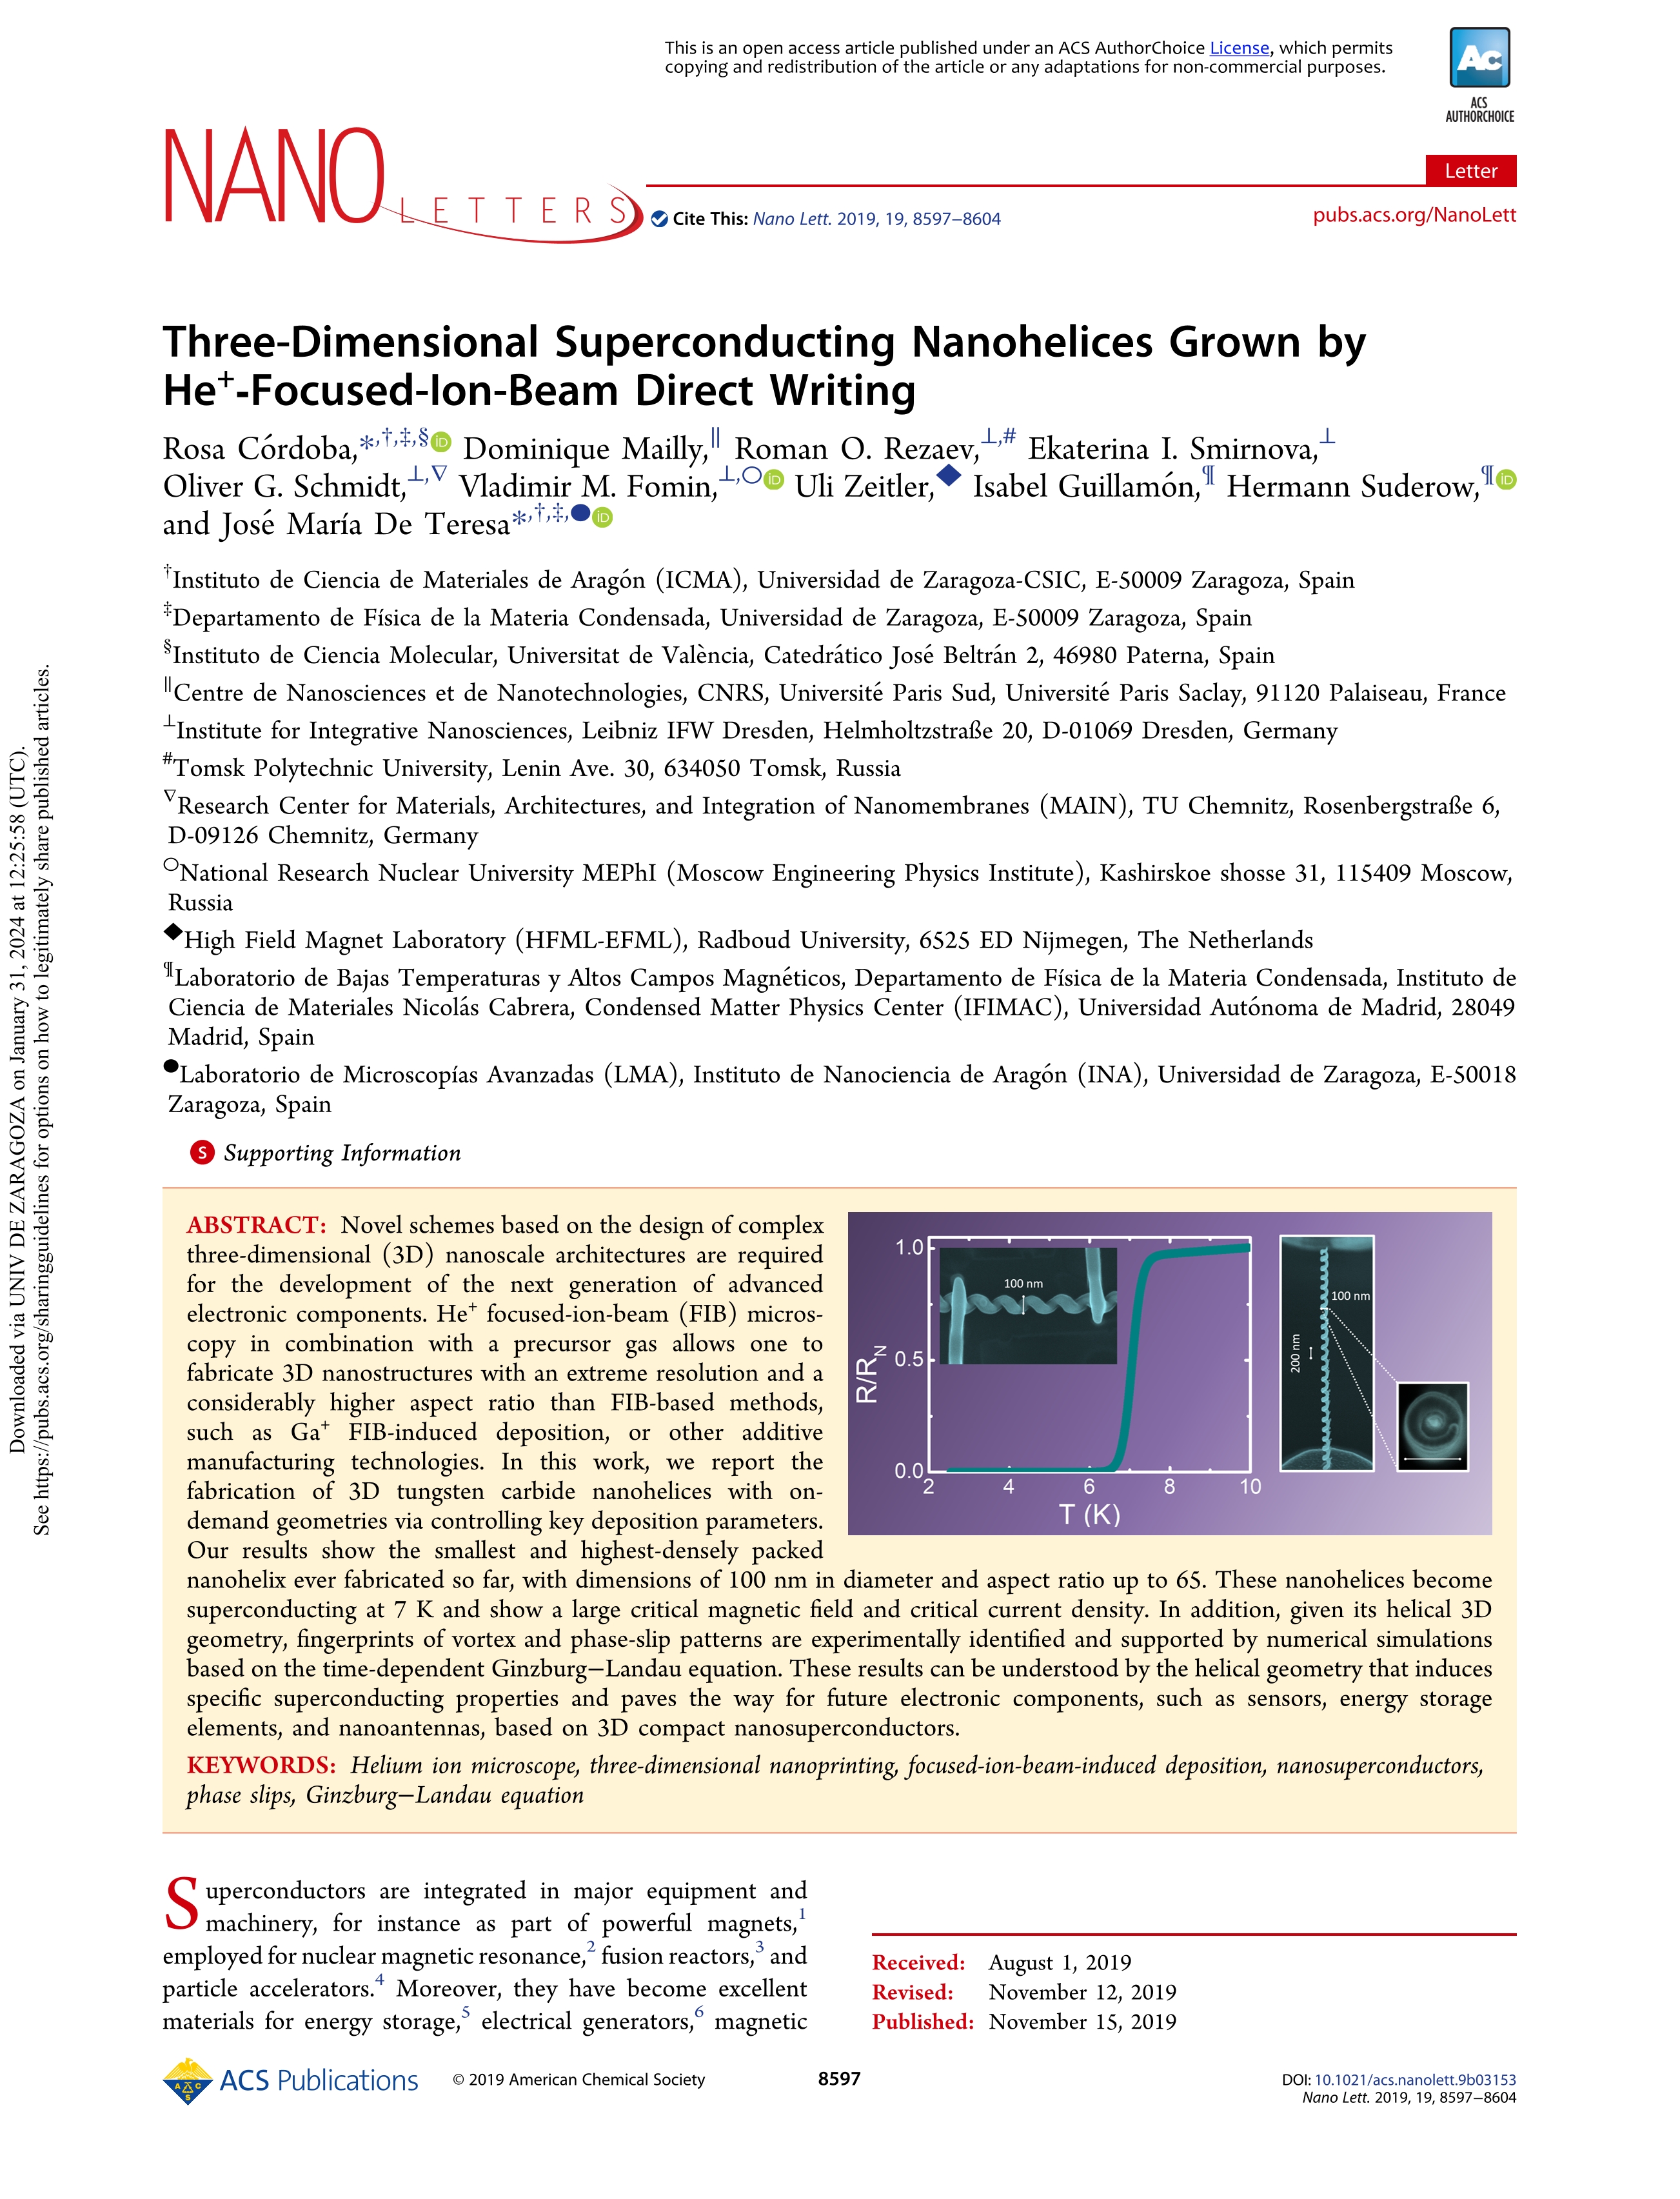 Three-Dimensional Superconducting Nanohelices Grown by He+-Focused-Ion-Beam Direct Writing